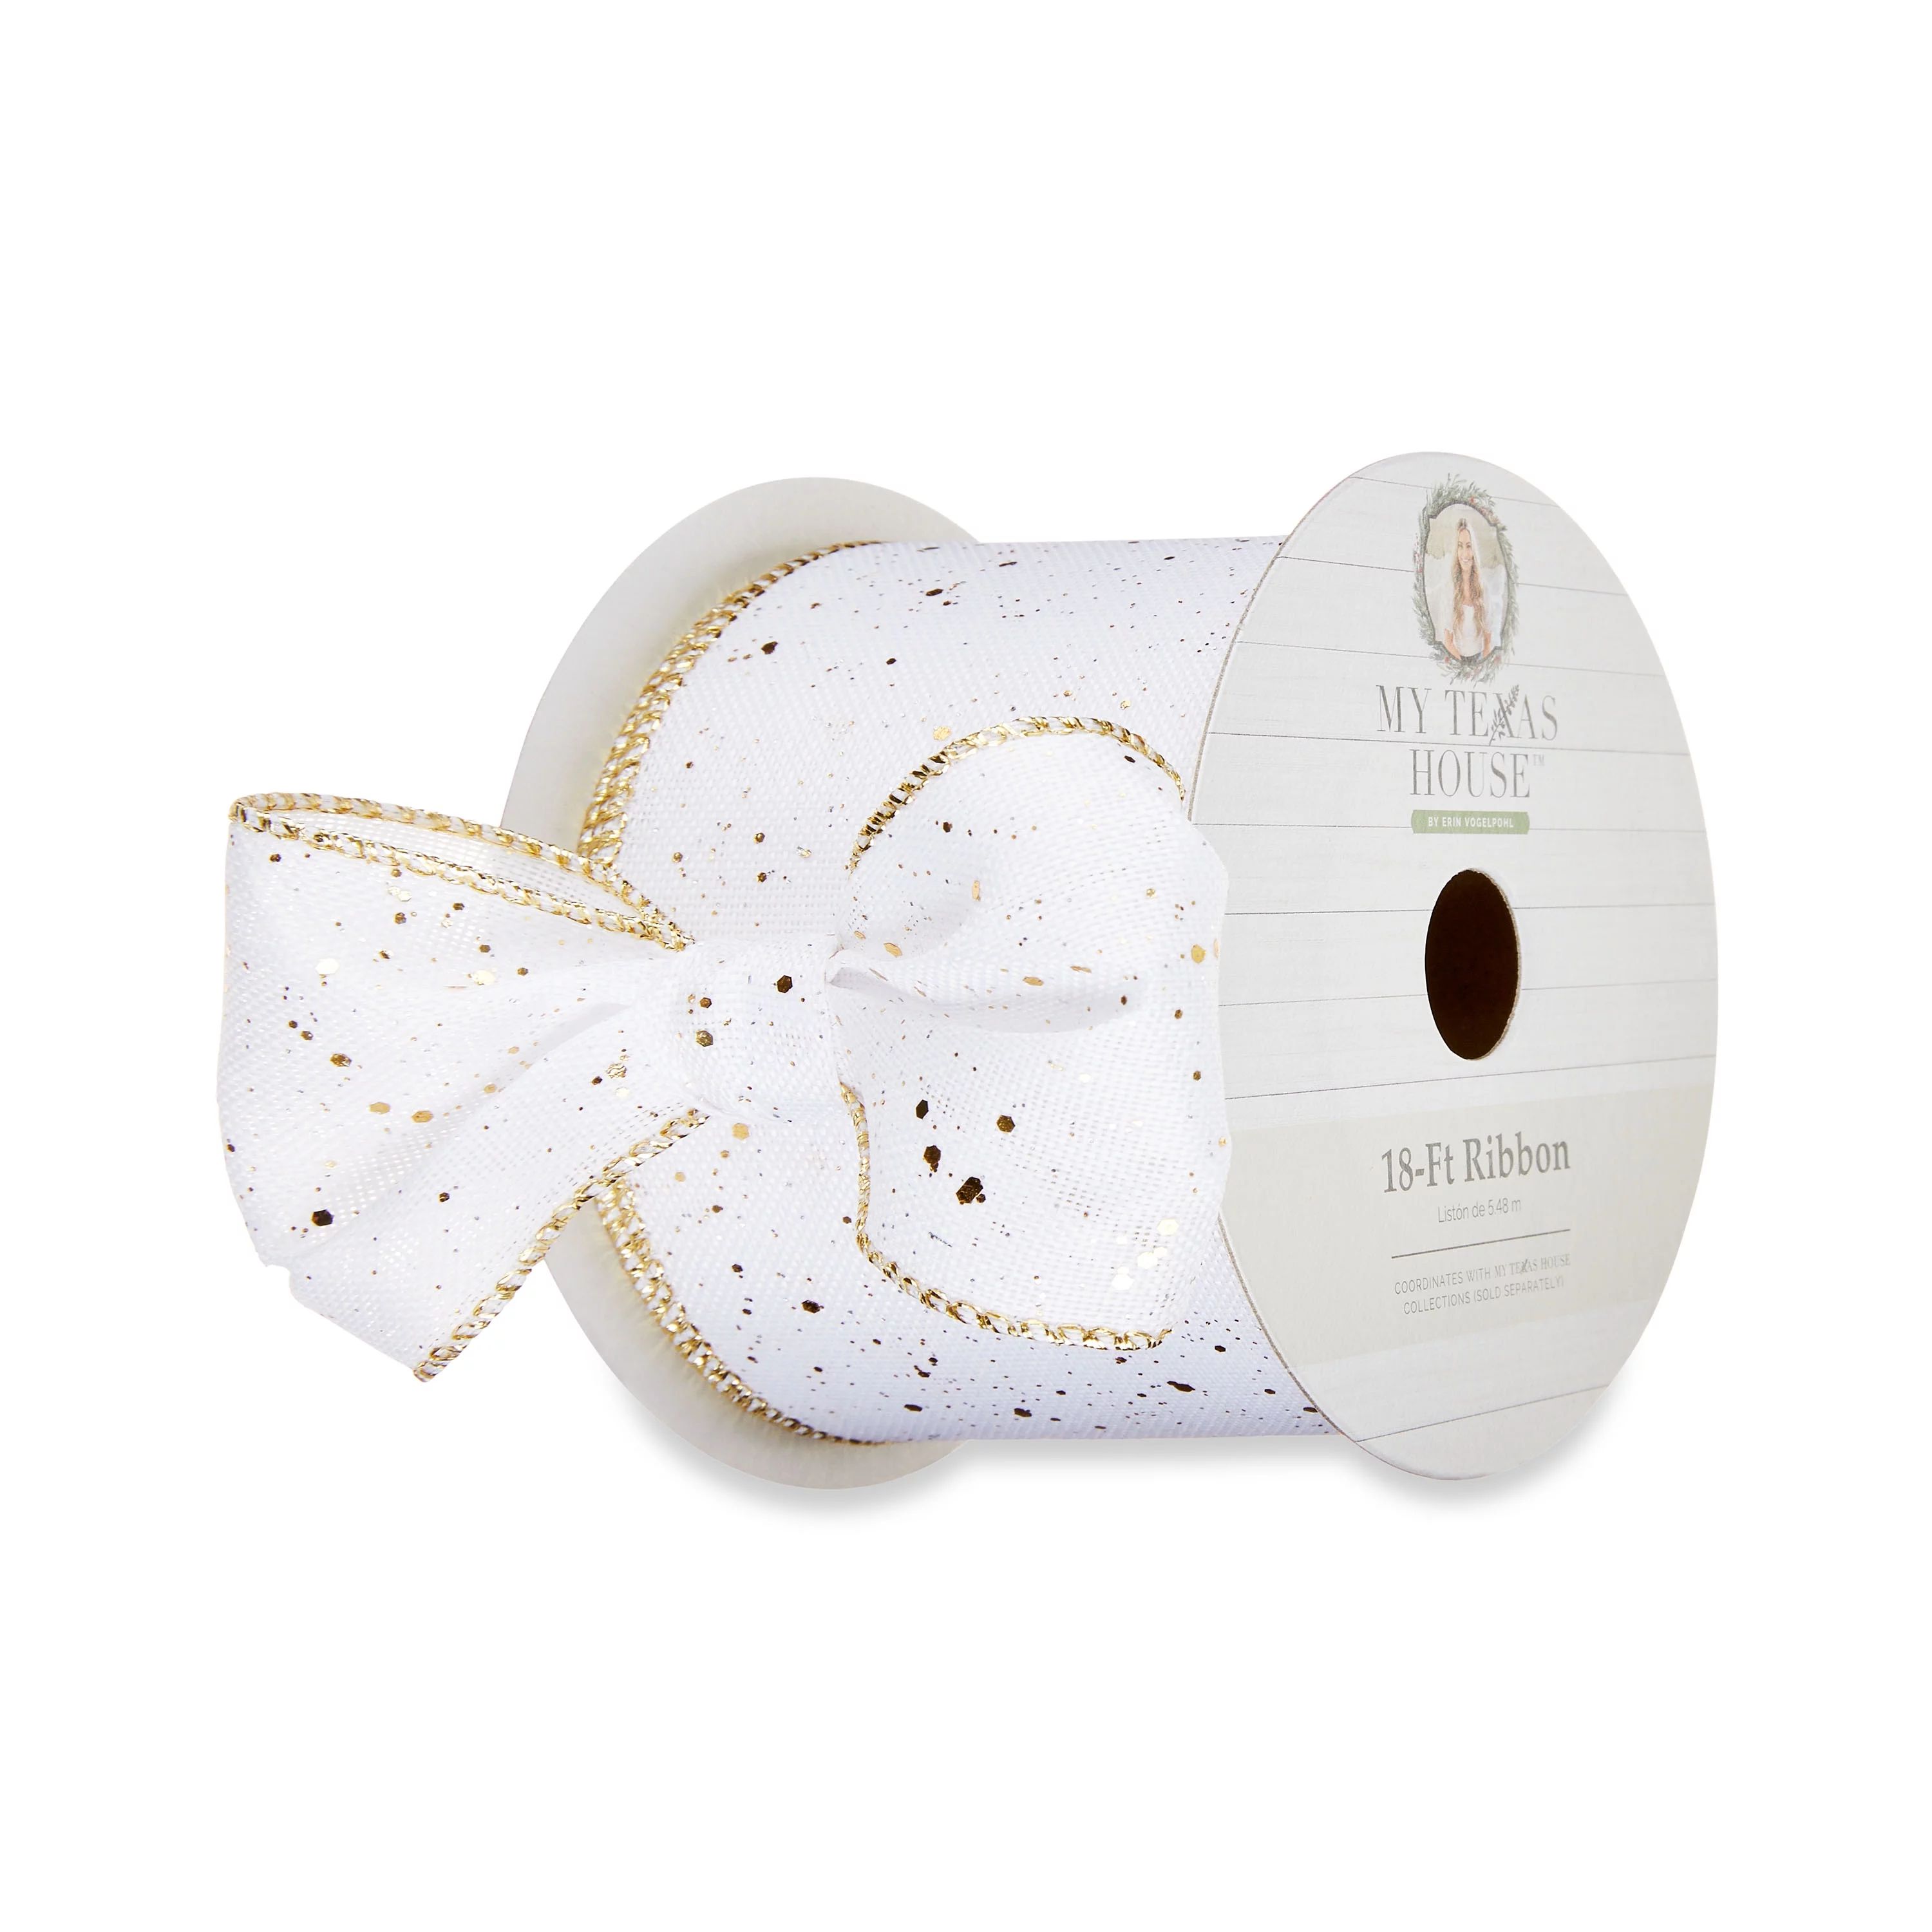 My Texas House White Gold Speckled Ribbon, 18‘ | Walmart (US)